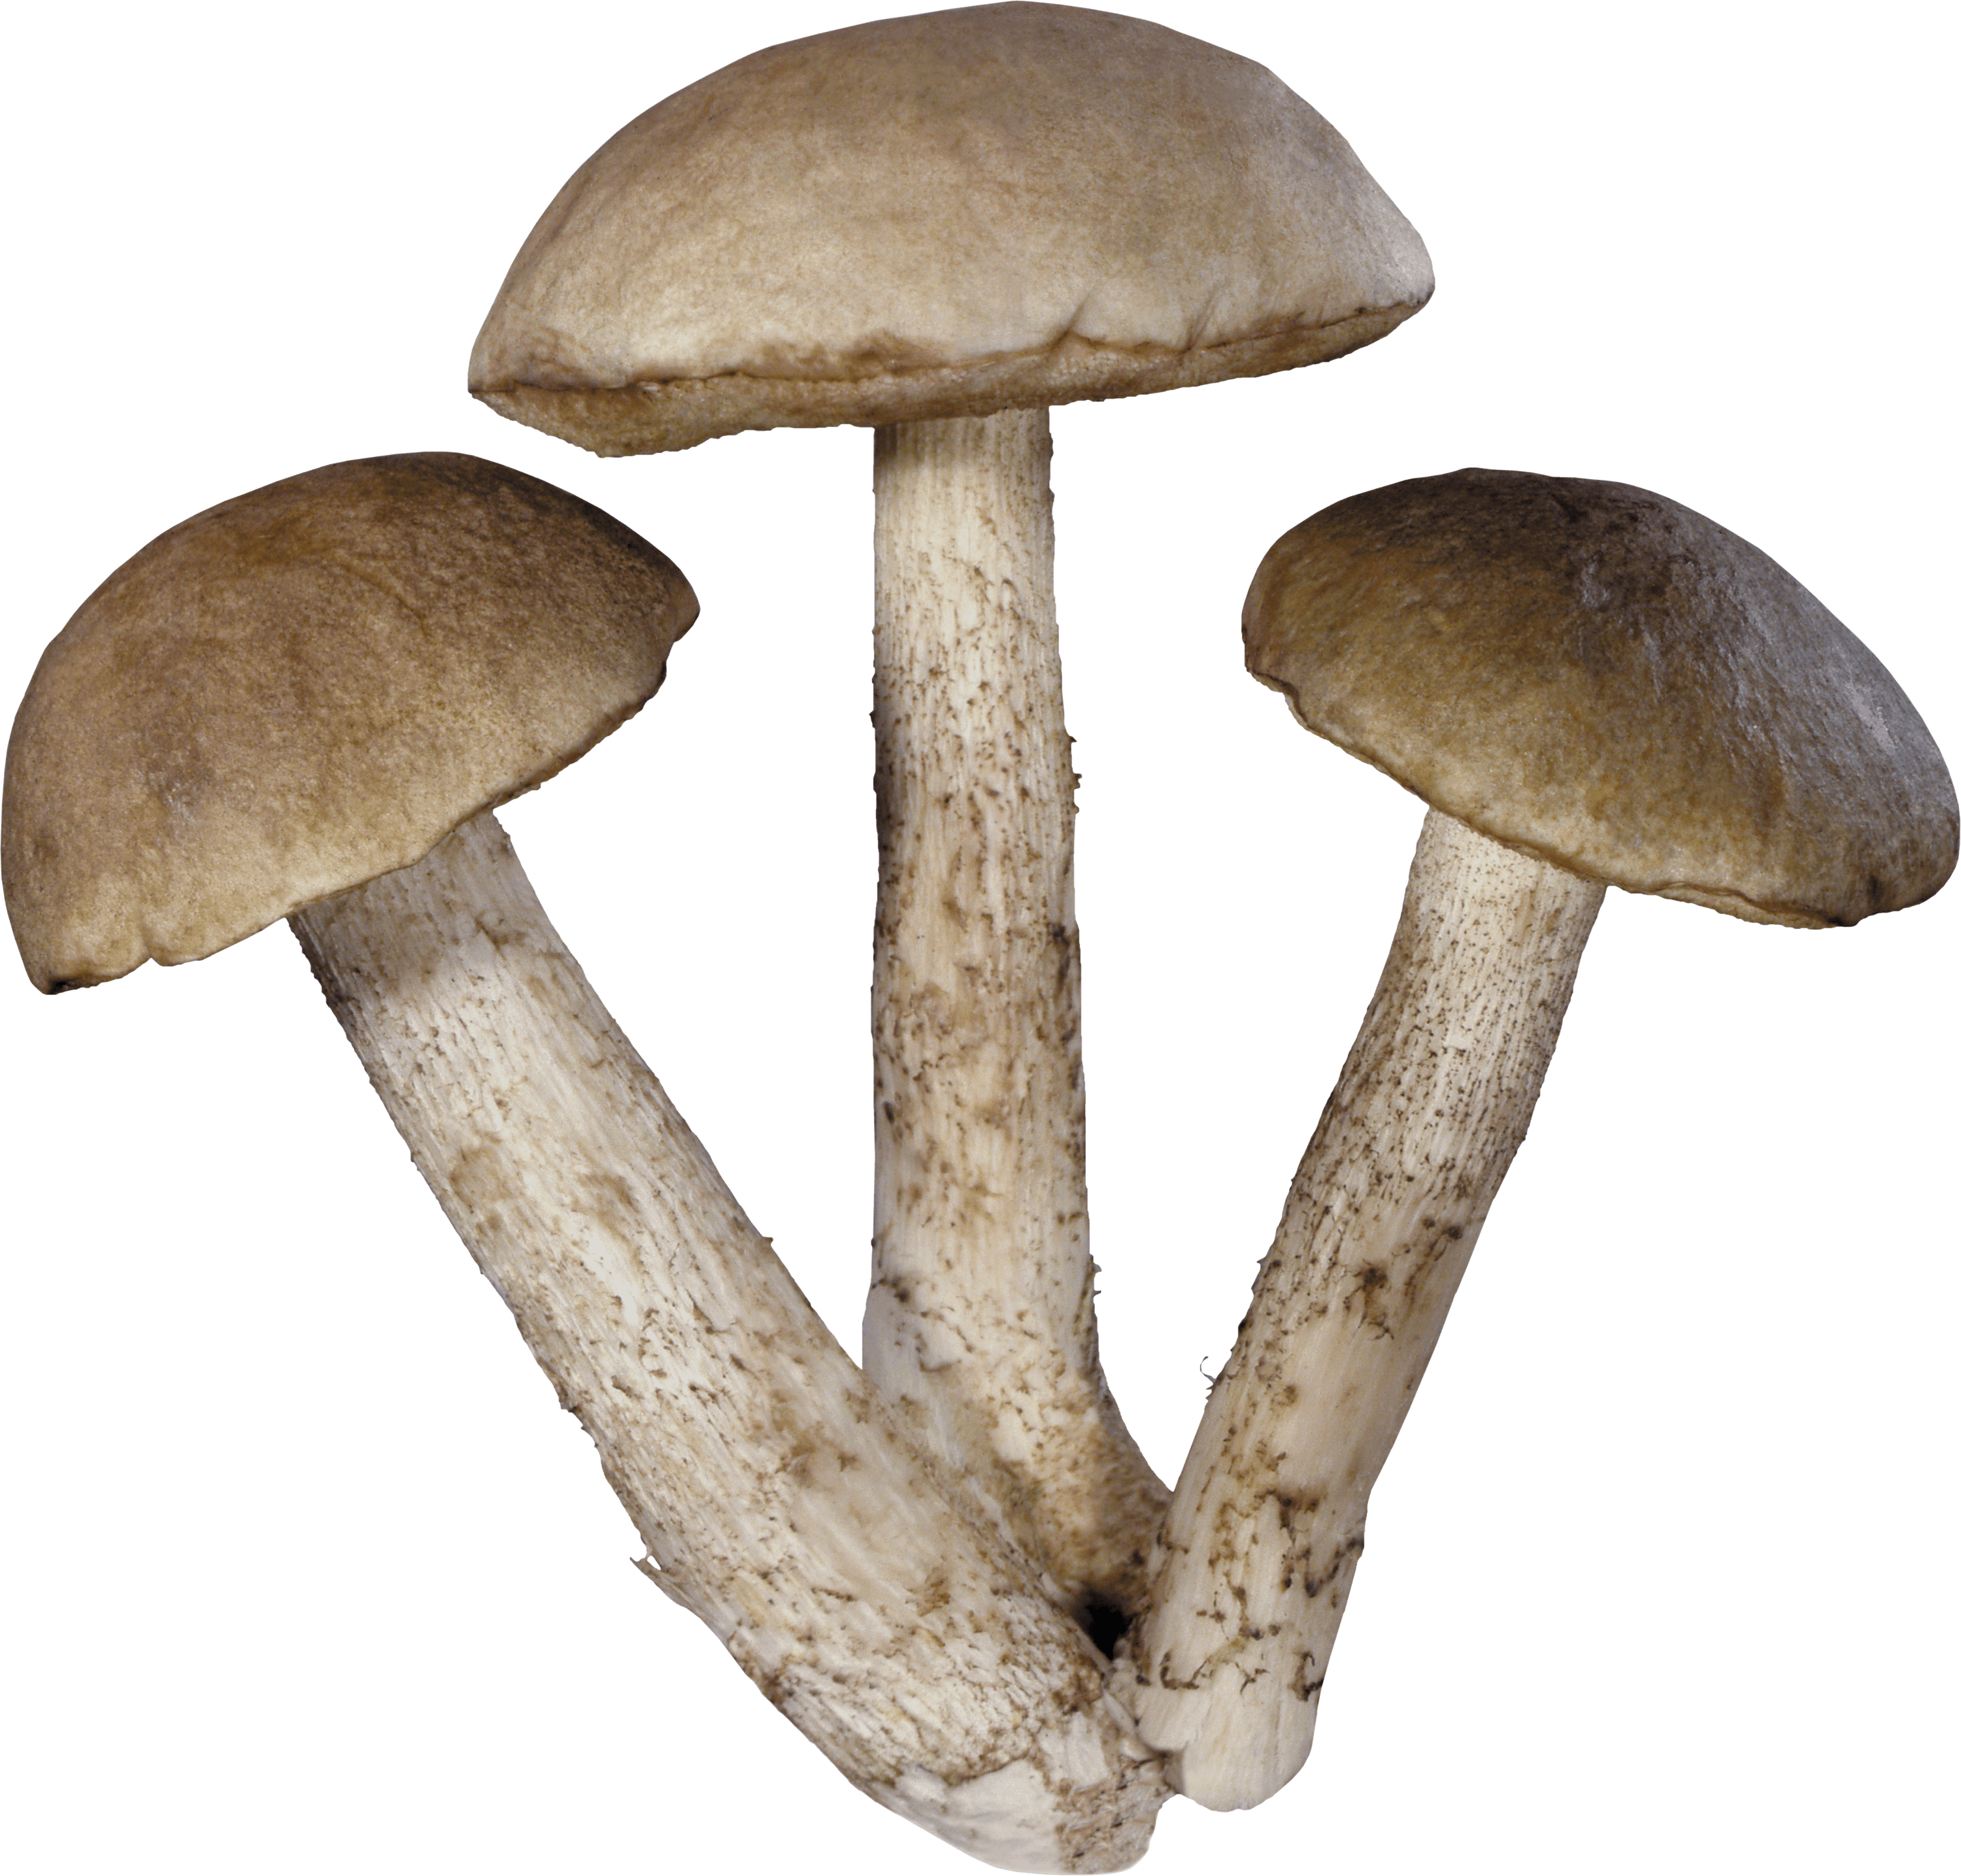 Group Of White Mushrooms PNG HD Quality